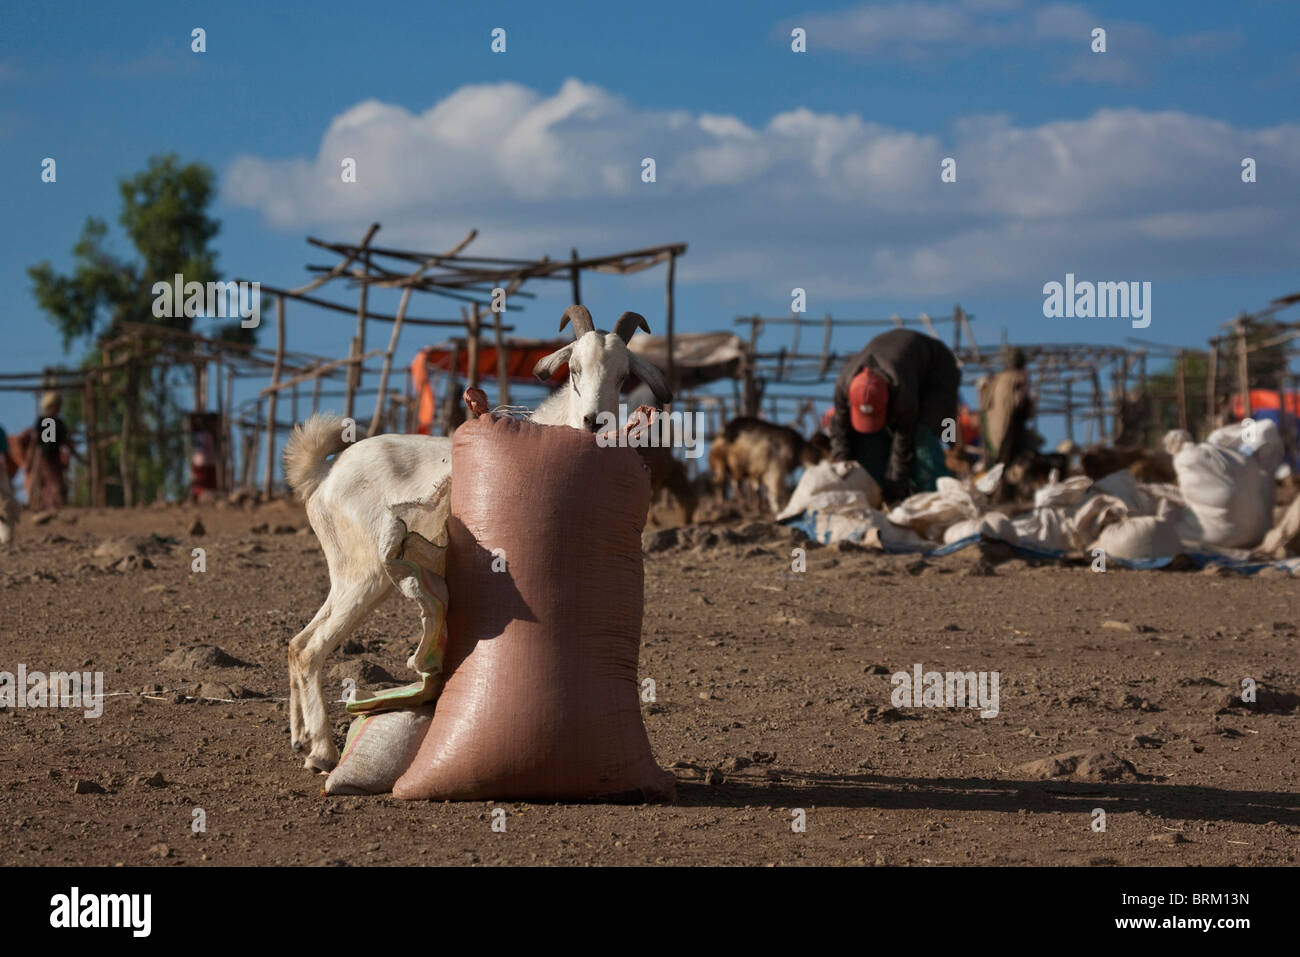 A goat trying to steal grain from a bag standing in Lalibela market Stock Photo